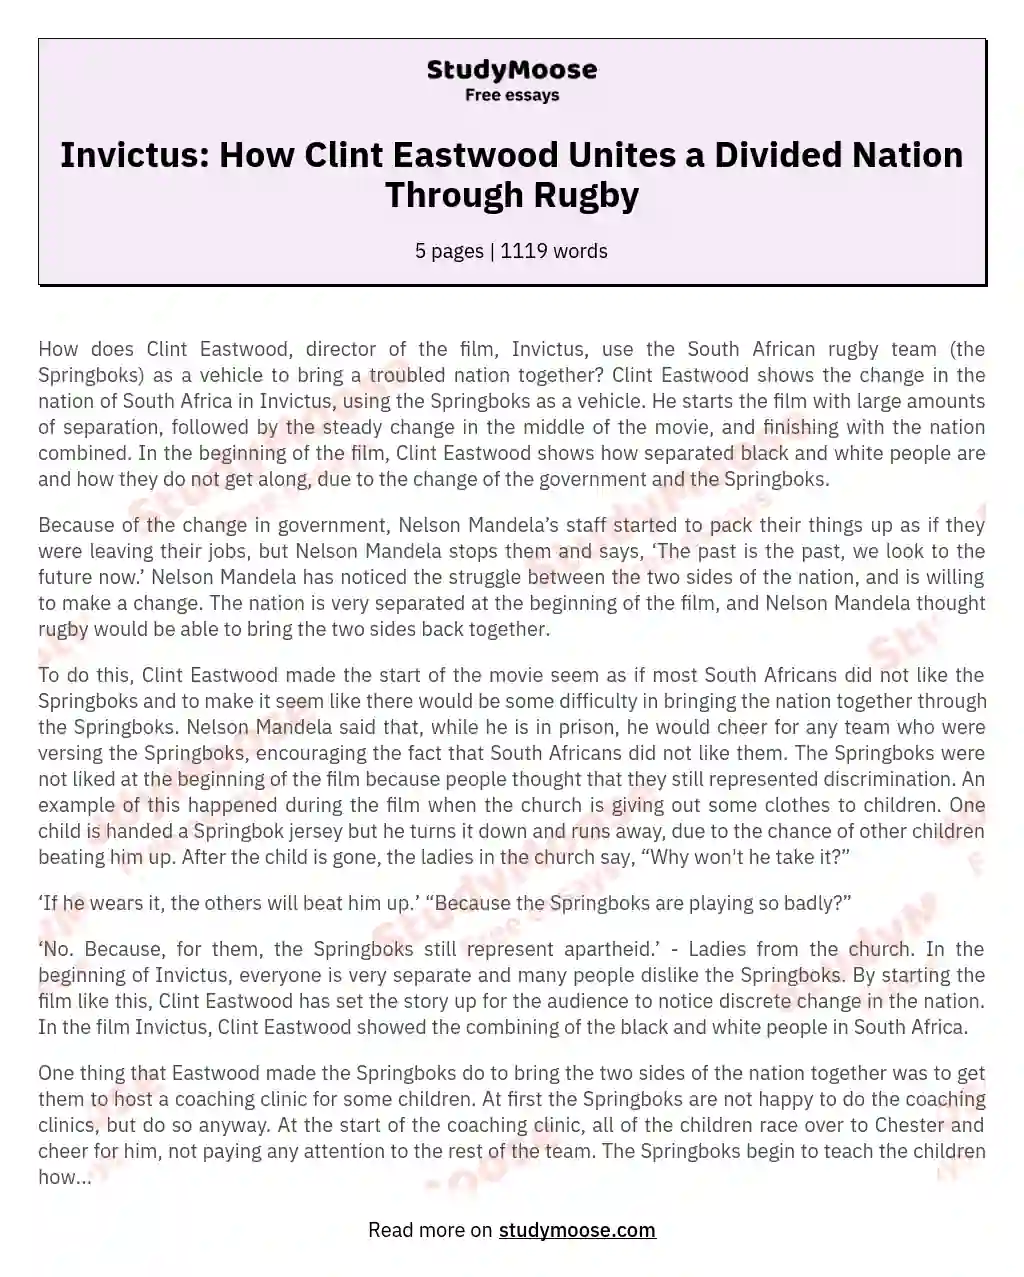 Invictus: How Clint Eastwood Unites a Divided Nation Through Rugby essay